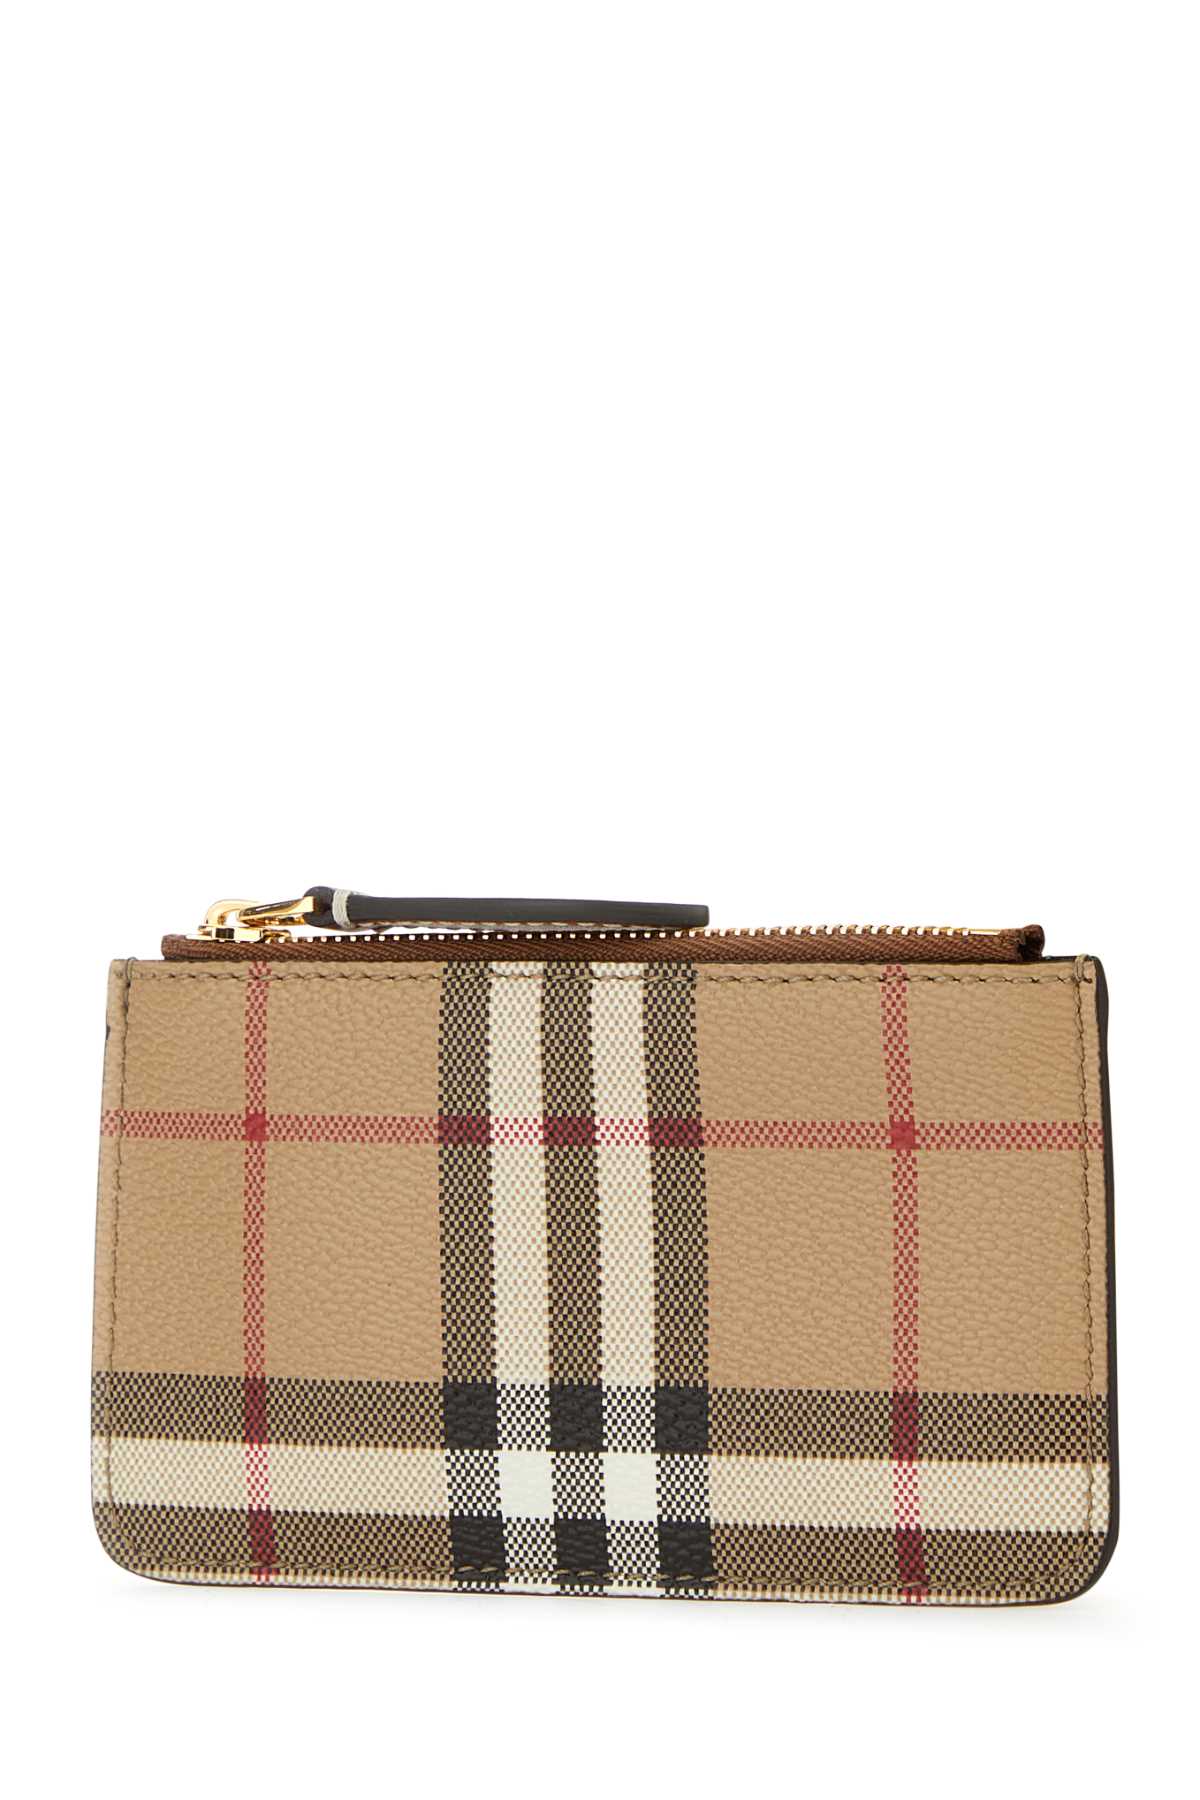 Shop Burberry Printed Canvas Coin Purse In Archivebeige